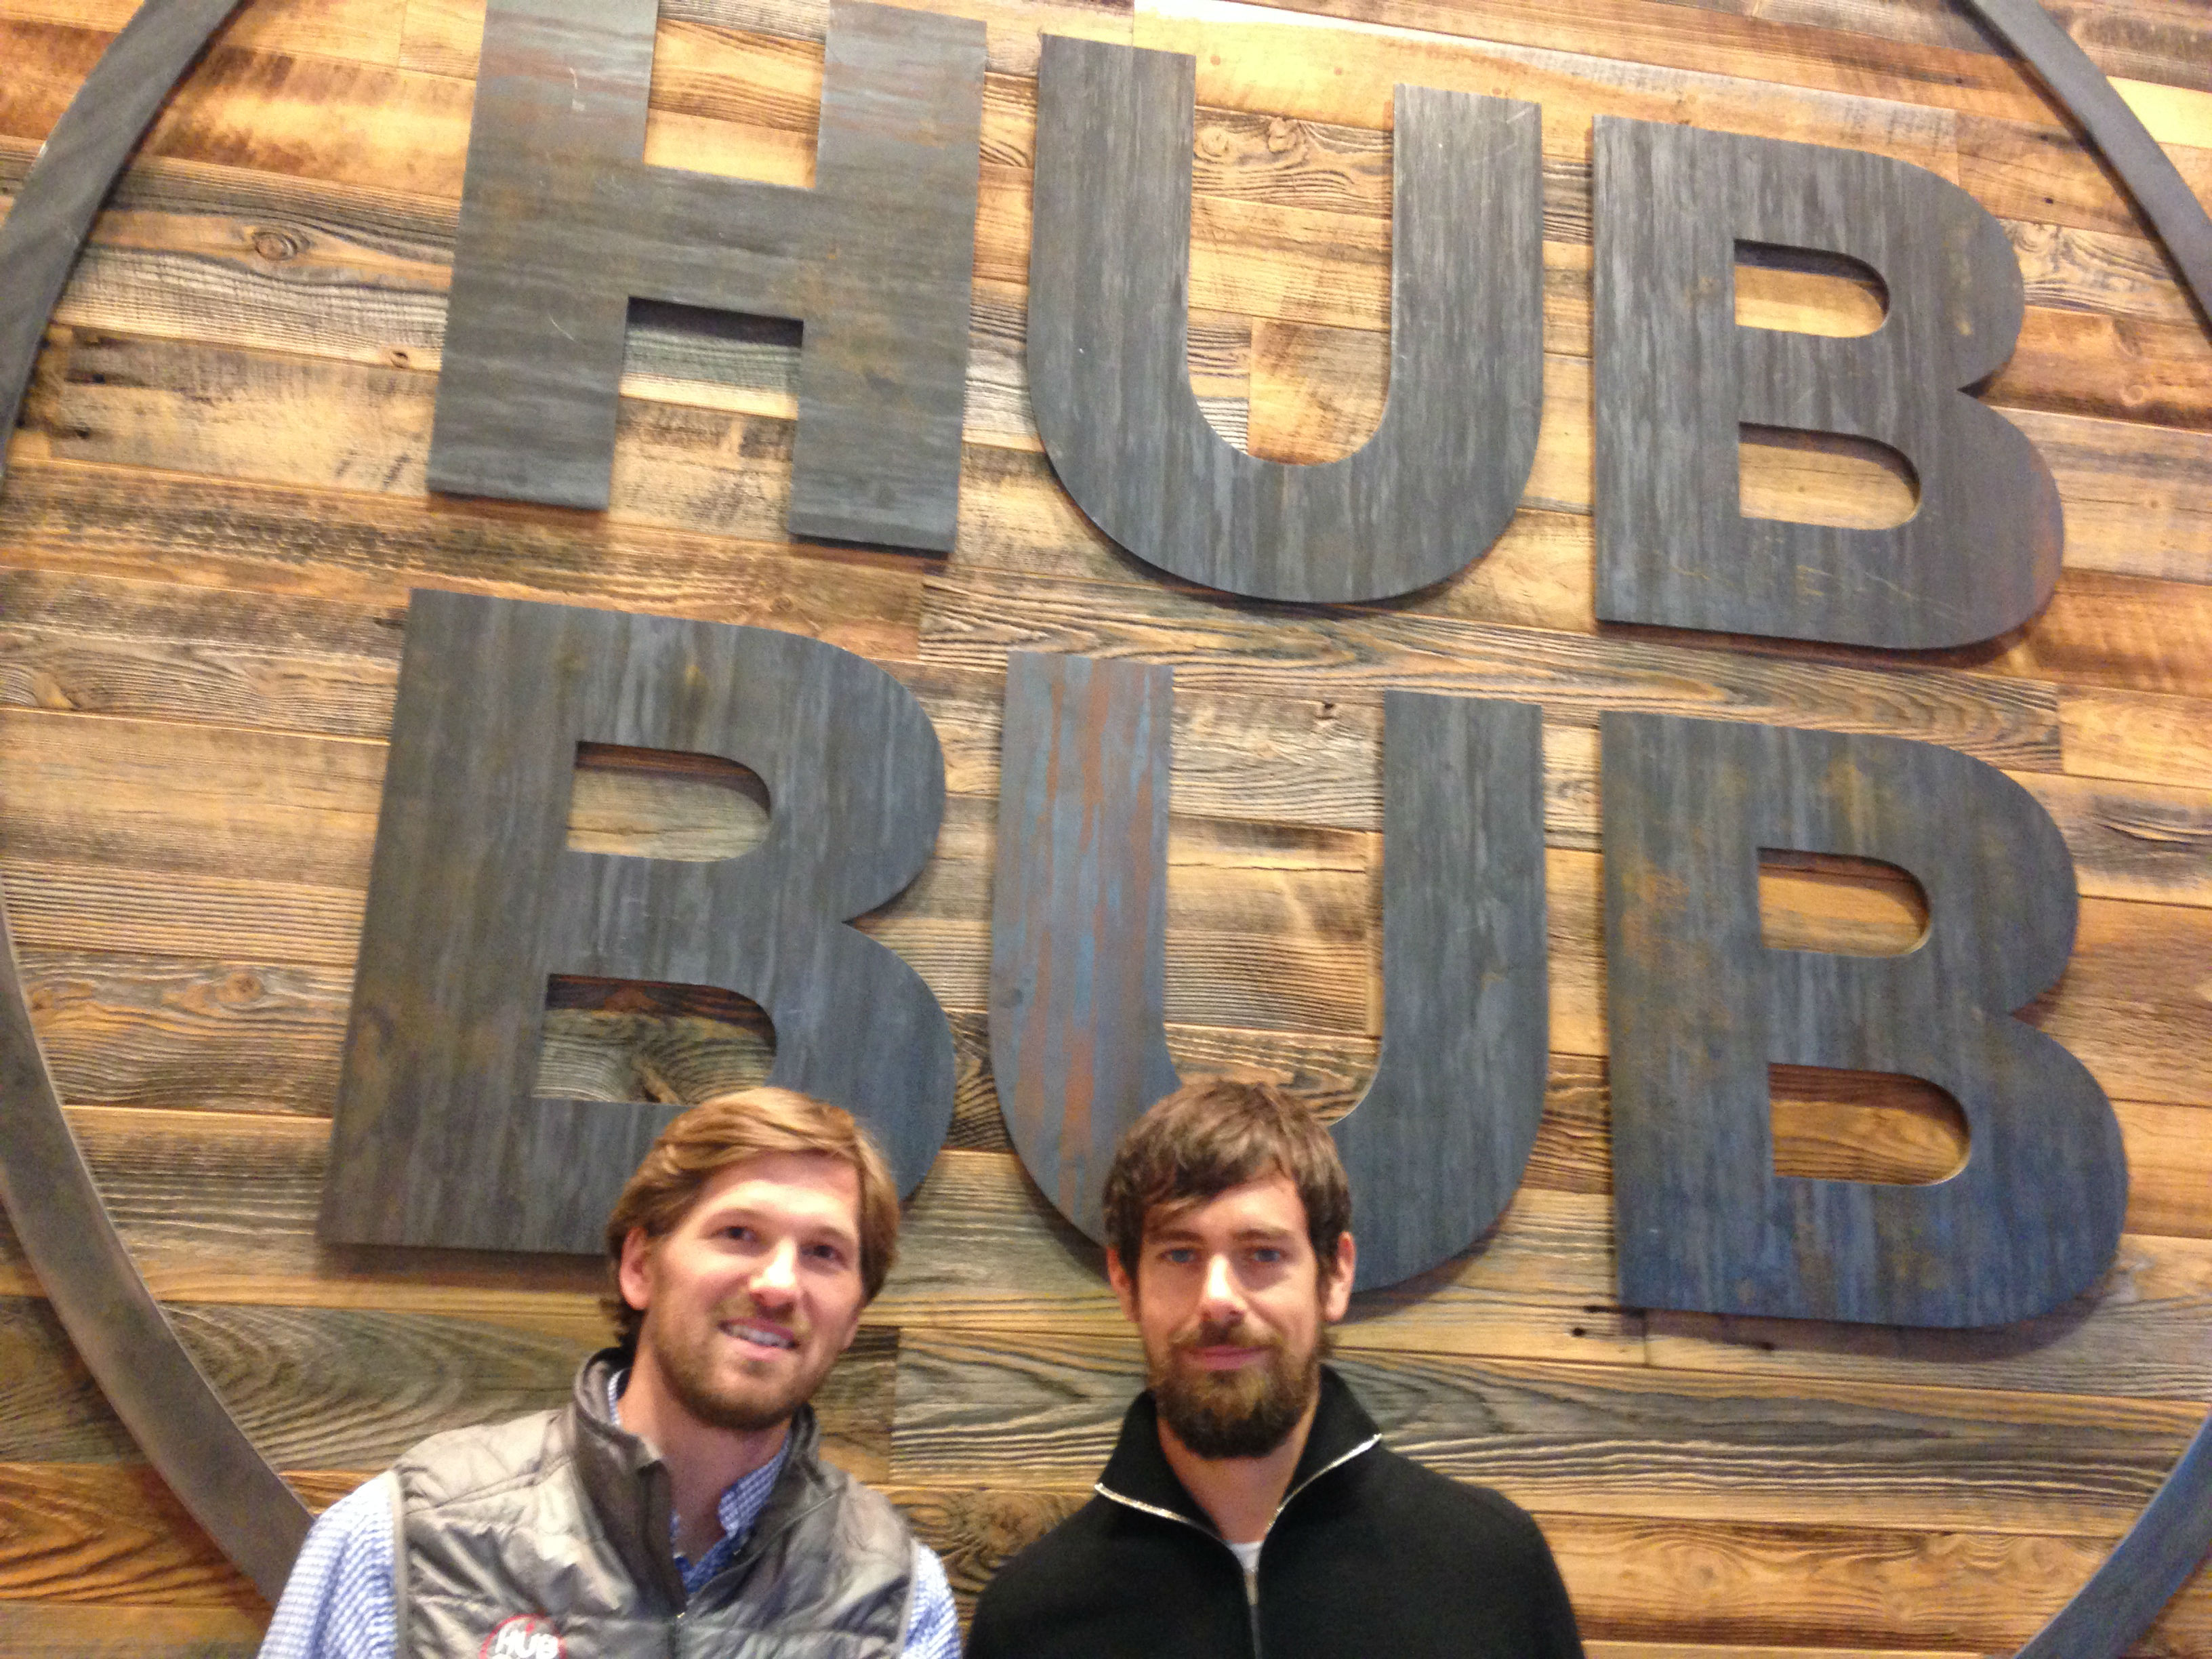 HubBub Coffee owner Drew Crockett on left, Twitter founder and Square CEO Jack Dorsey on right at HubBub Coffee's 17th and Arch location. (Credit: Ian Bush/KYW)